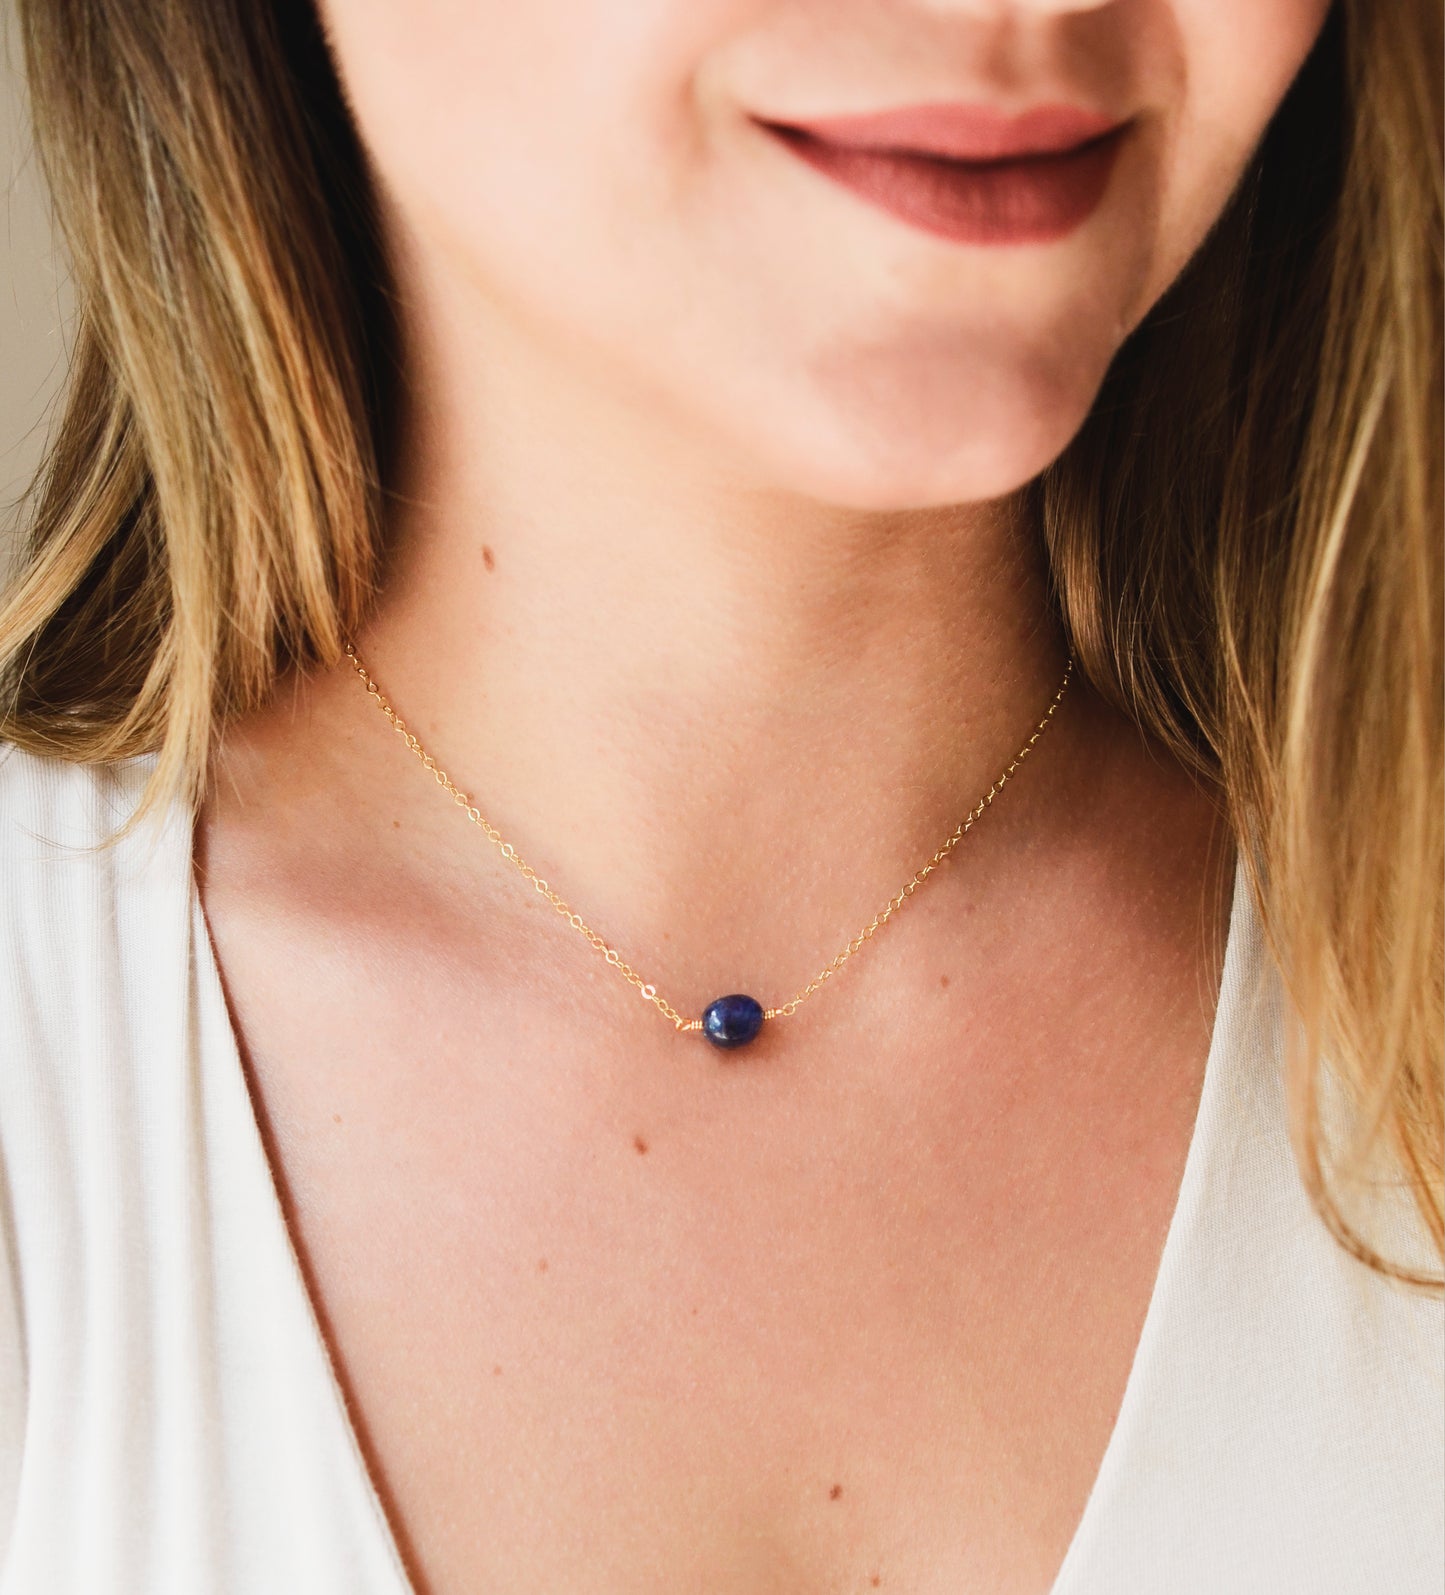 Small blue sapphire stone set onto a gold chain. The stone is a puffed oval shape. Modeled image.